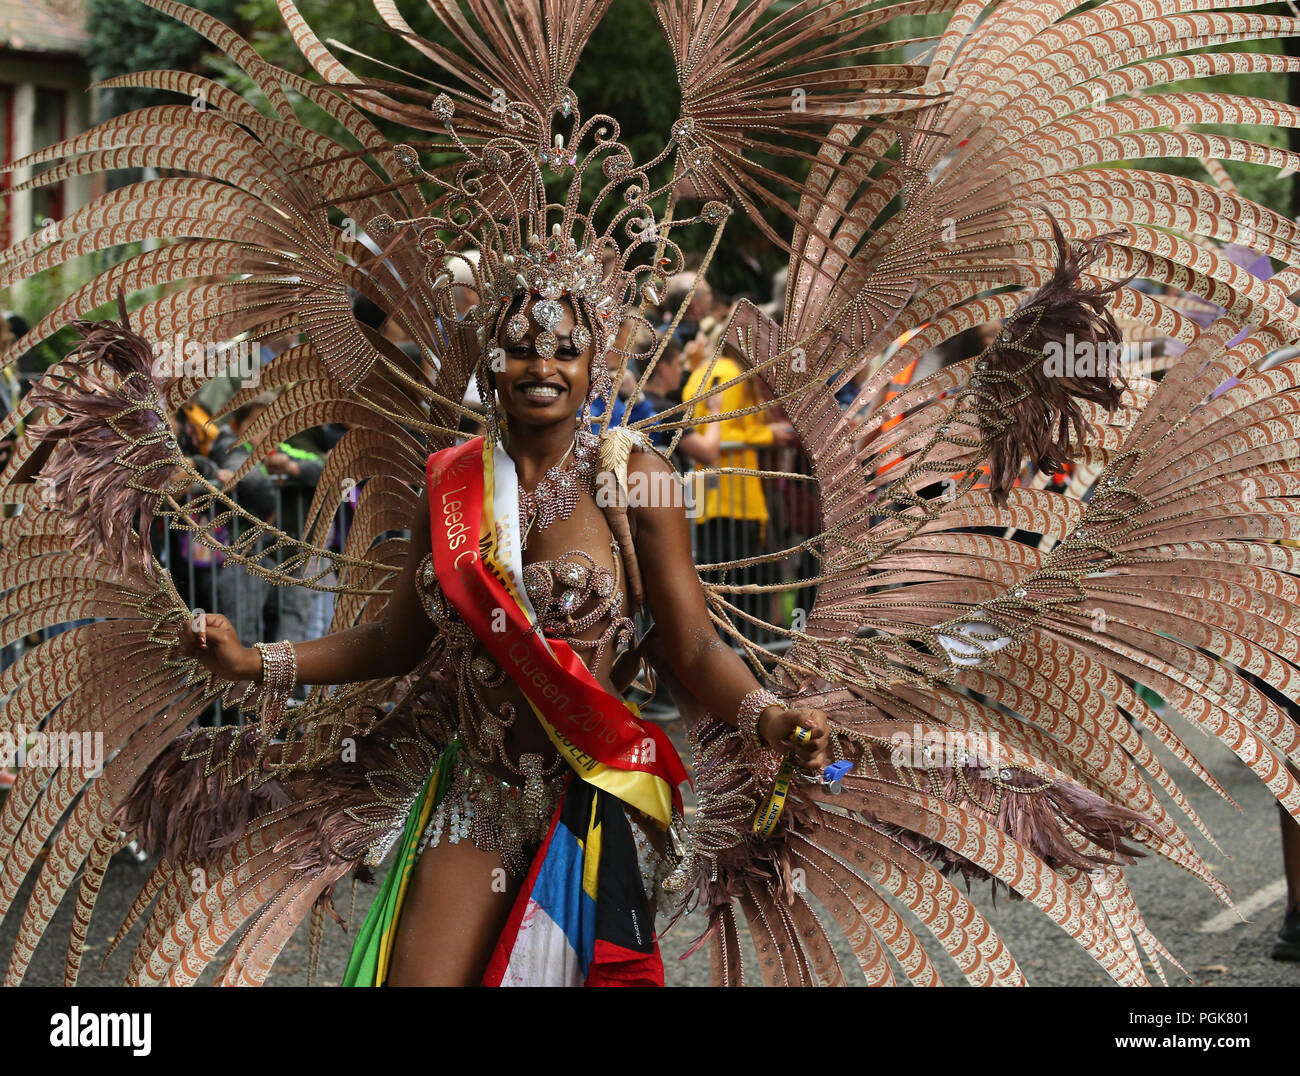 Potternewton Park, Leeds, West Yorkshire, 27th August 2018.   Performers participate in the Leeds West Indian Carnival 2018 in Leeds, UK, on Aug. 27th, 2018. The Leeds West Indian Carnival, is celebrating is 51th year in the city of Leeds. The carnival was originated in 1967 by Arthur France as a way for Afro-Caribbean communities to celebrate their own cultures and traditions, and is one of the biggest West Indian carnivals outside of London.   Credit: Stephen Gaunt/Touchlinepics.com/Alamy Live News Stock Photo